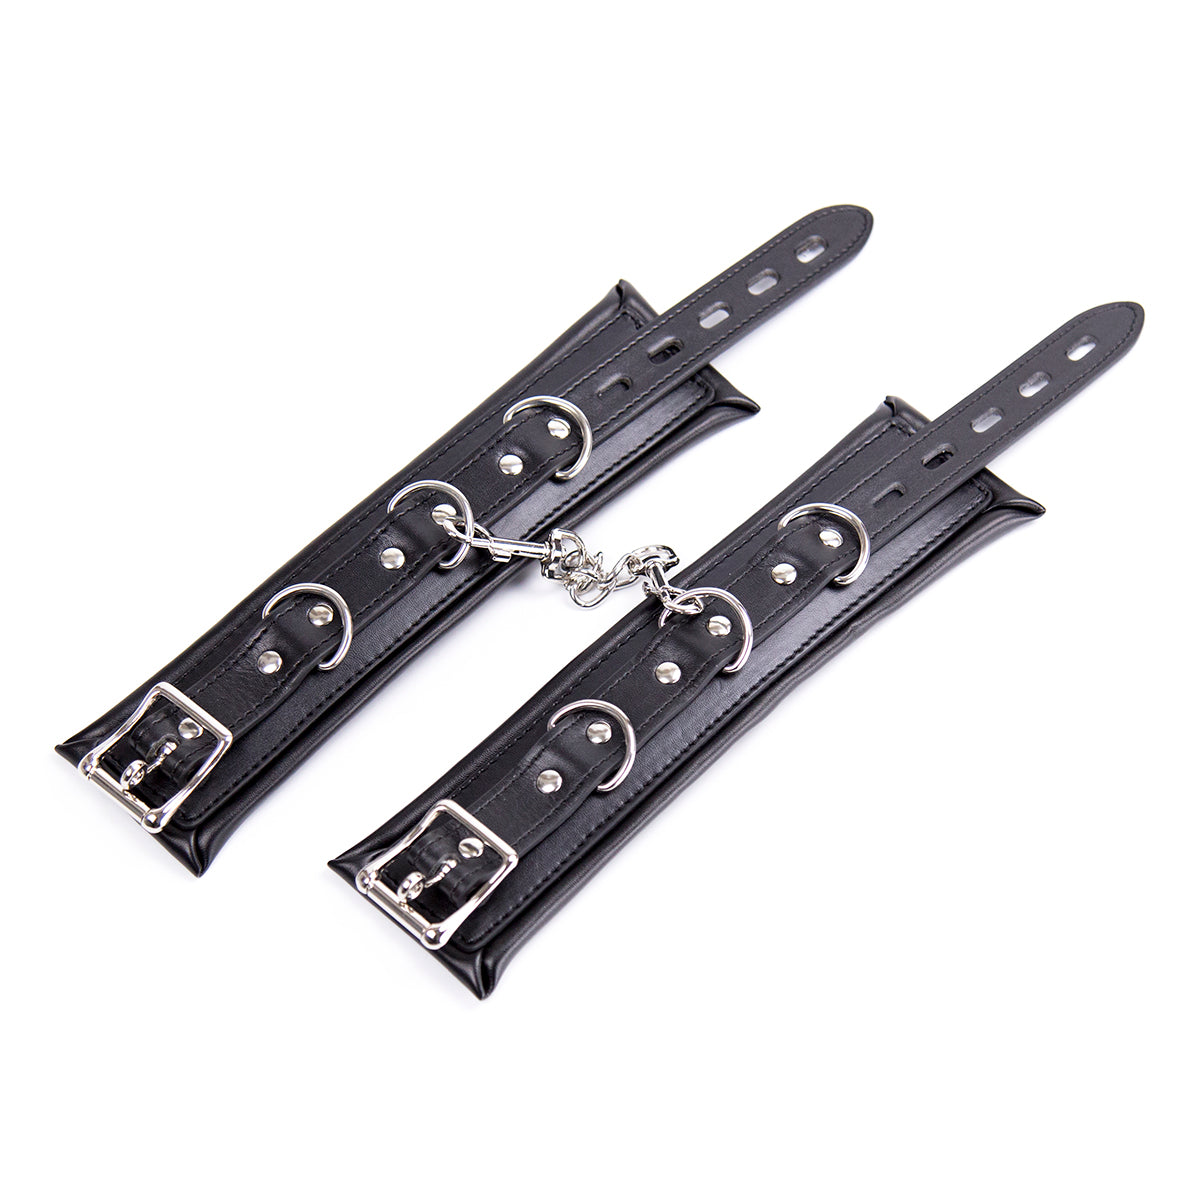 Soft Leather Handcuffs 3 Lock Rings